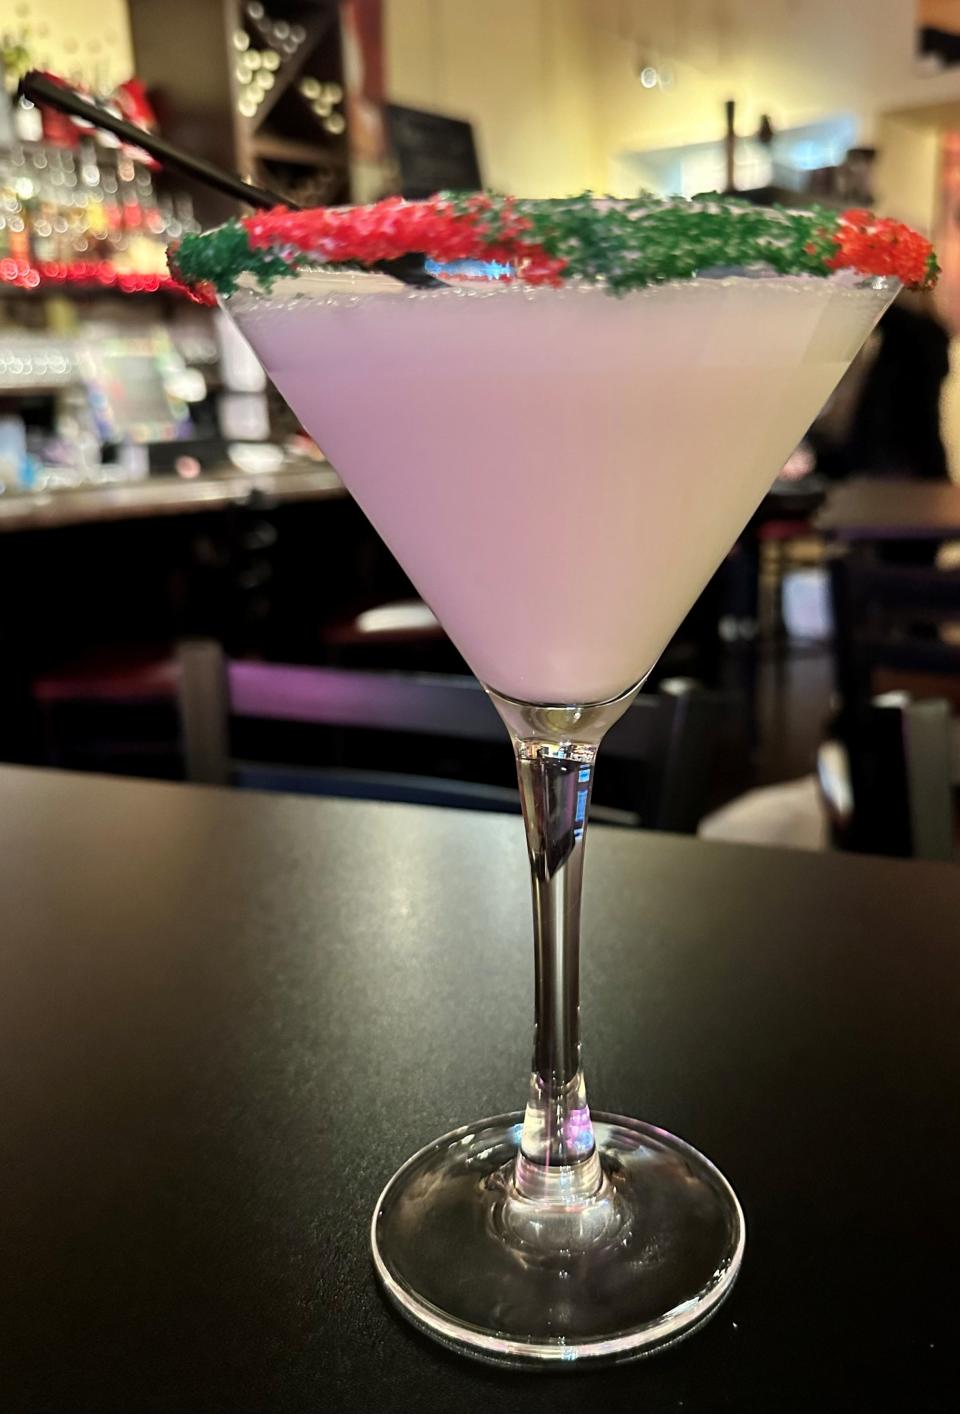 Available at Grapes in a Glass, this naughty vanilla vodka cocktail is a celebration itself that features rumchata, amaretto and vanilla vodka.